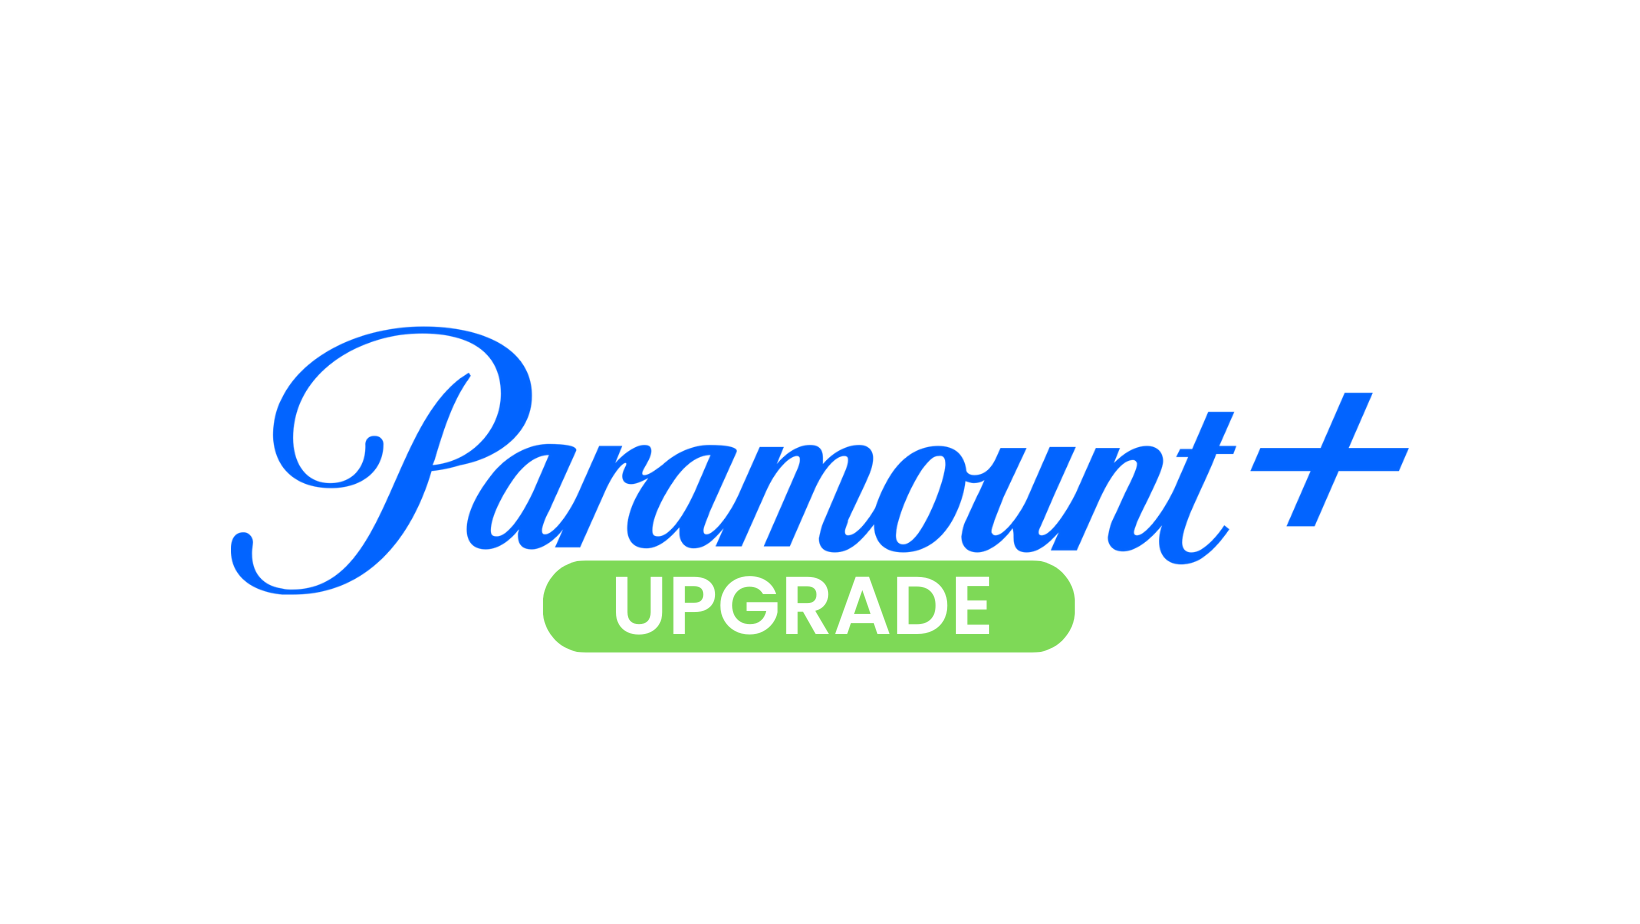 Paramount + No Ads (USA) | 6 Months Upgrade on Your Own Account